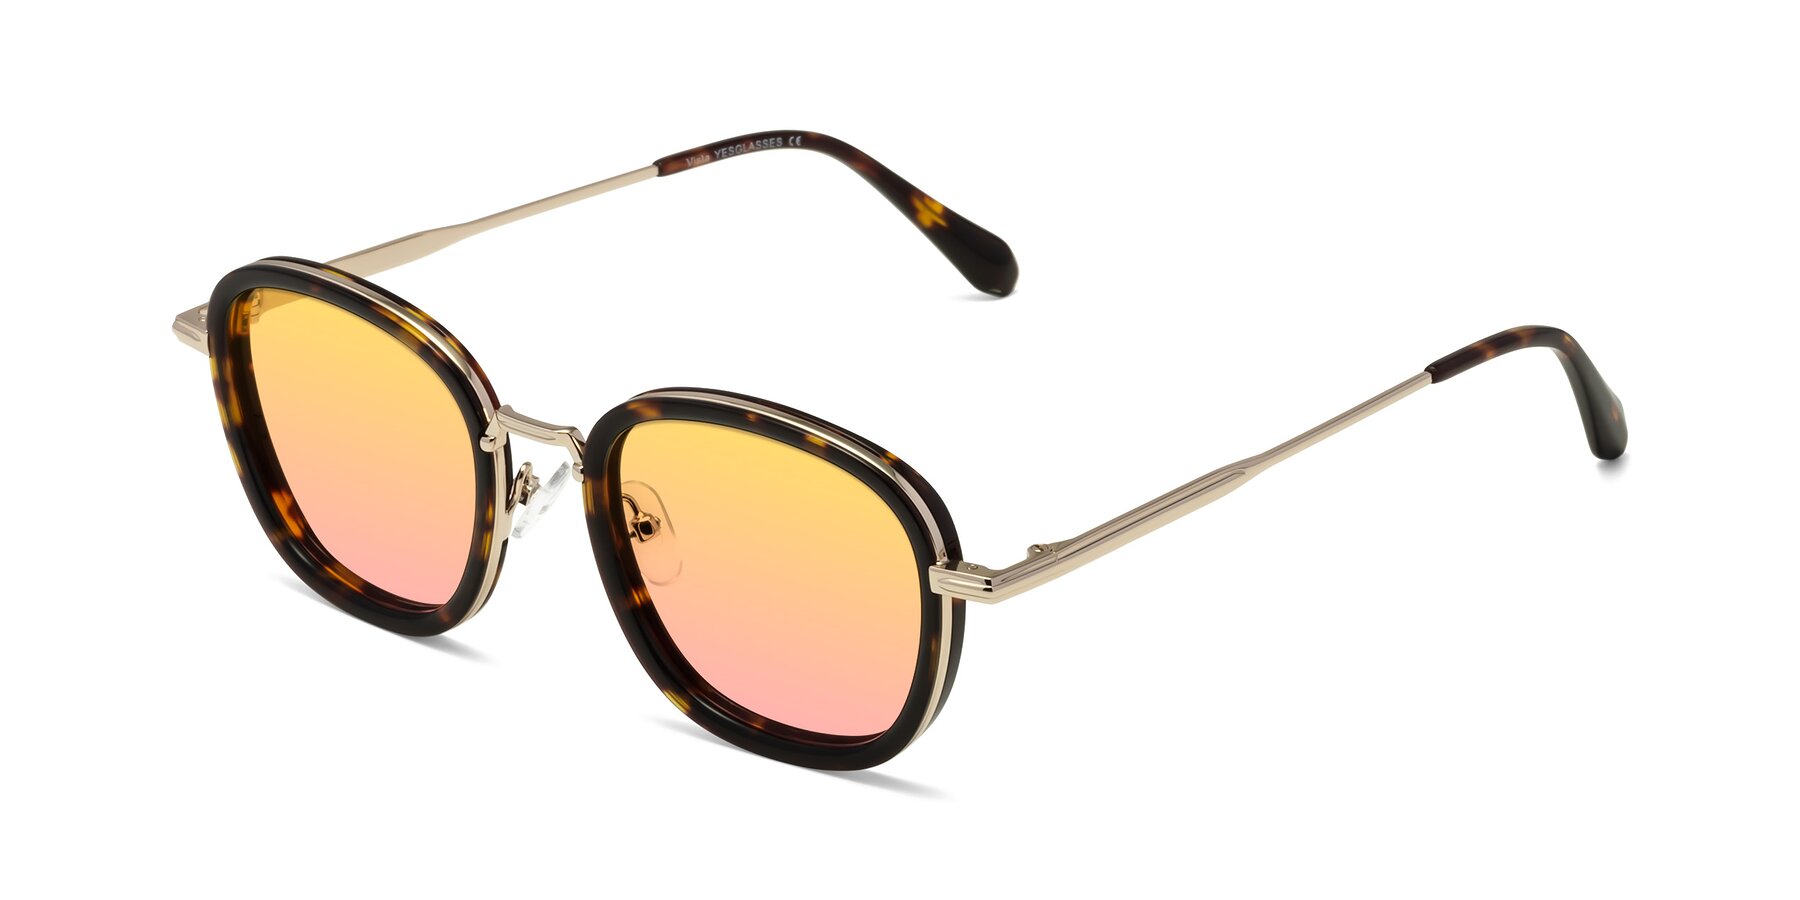 Angle of Vista in Tortoise-Light Gold with Yellow / Pink Gradient Lenses